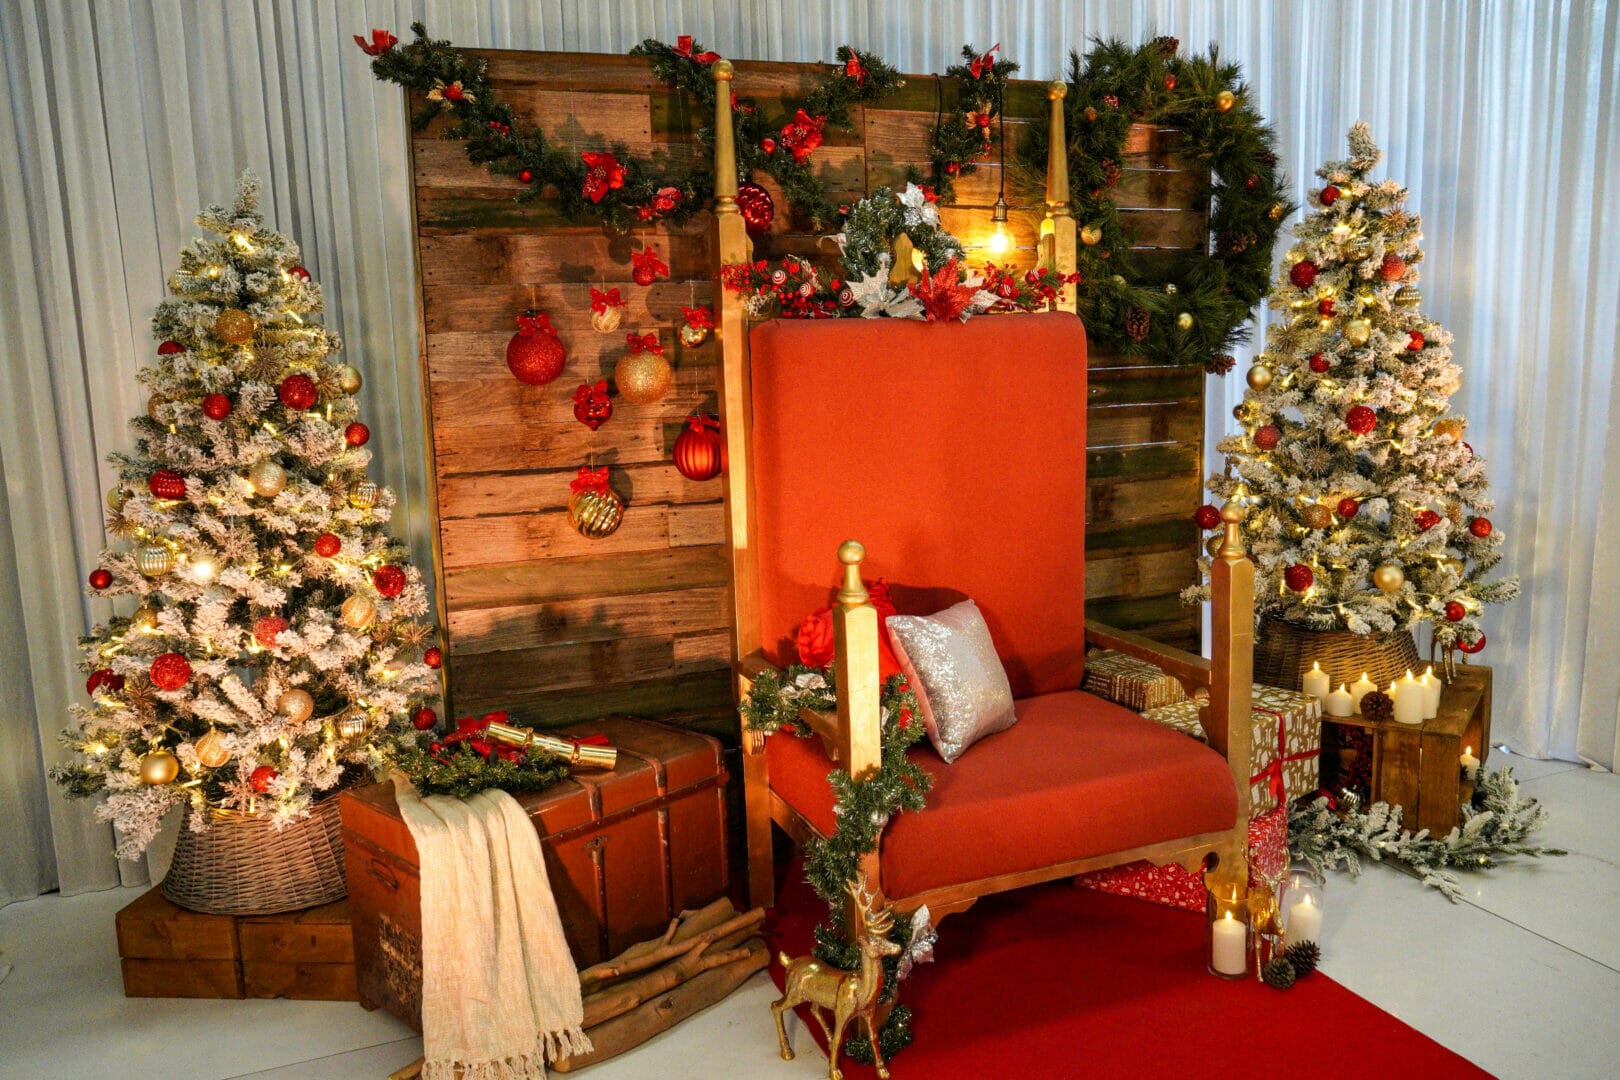 christmas themed backdrop with a santa throne, christmas trees, ornaments, garlands, wreaths, presents, and a rustic backdrop